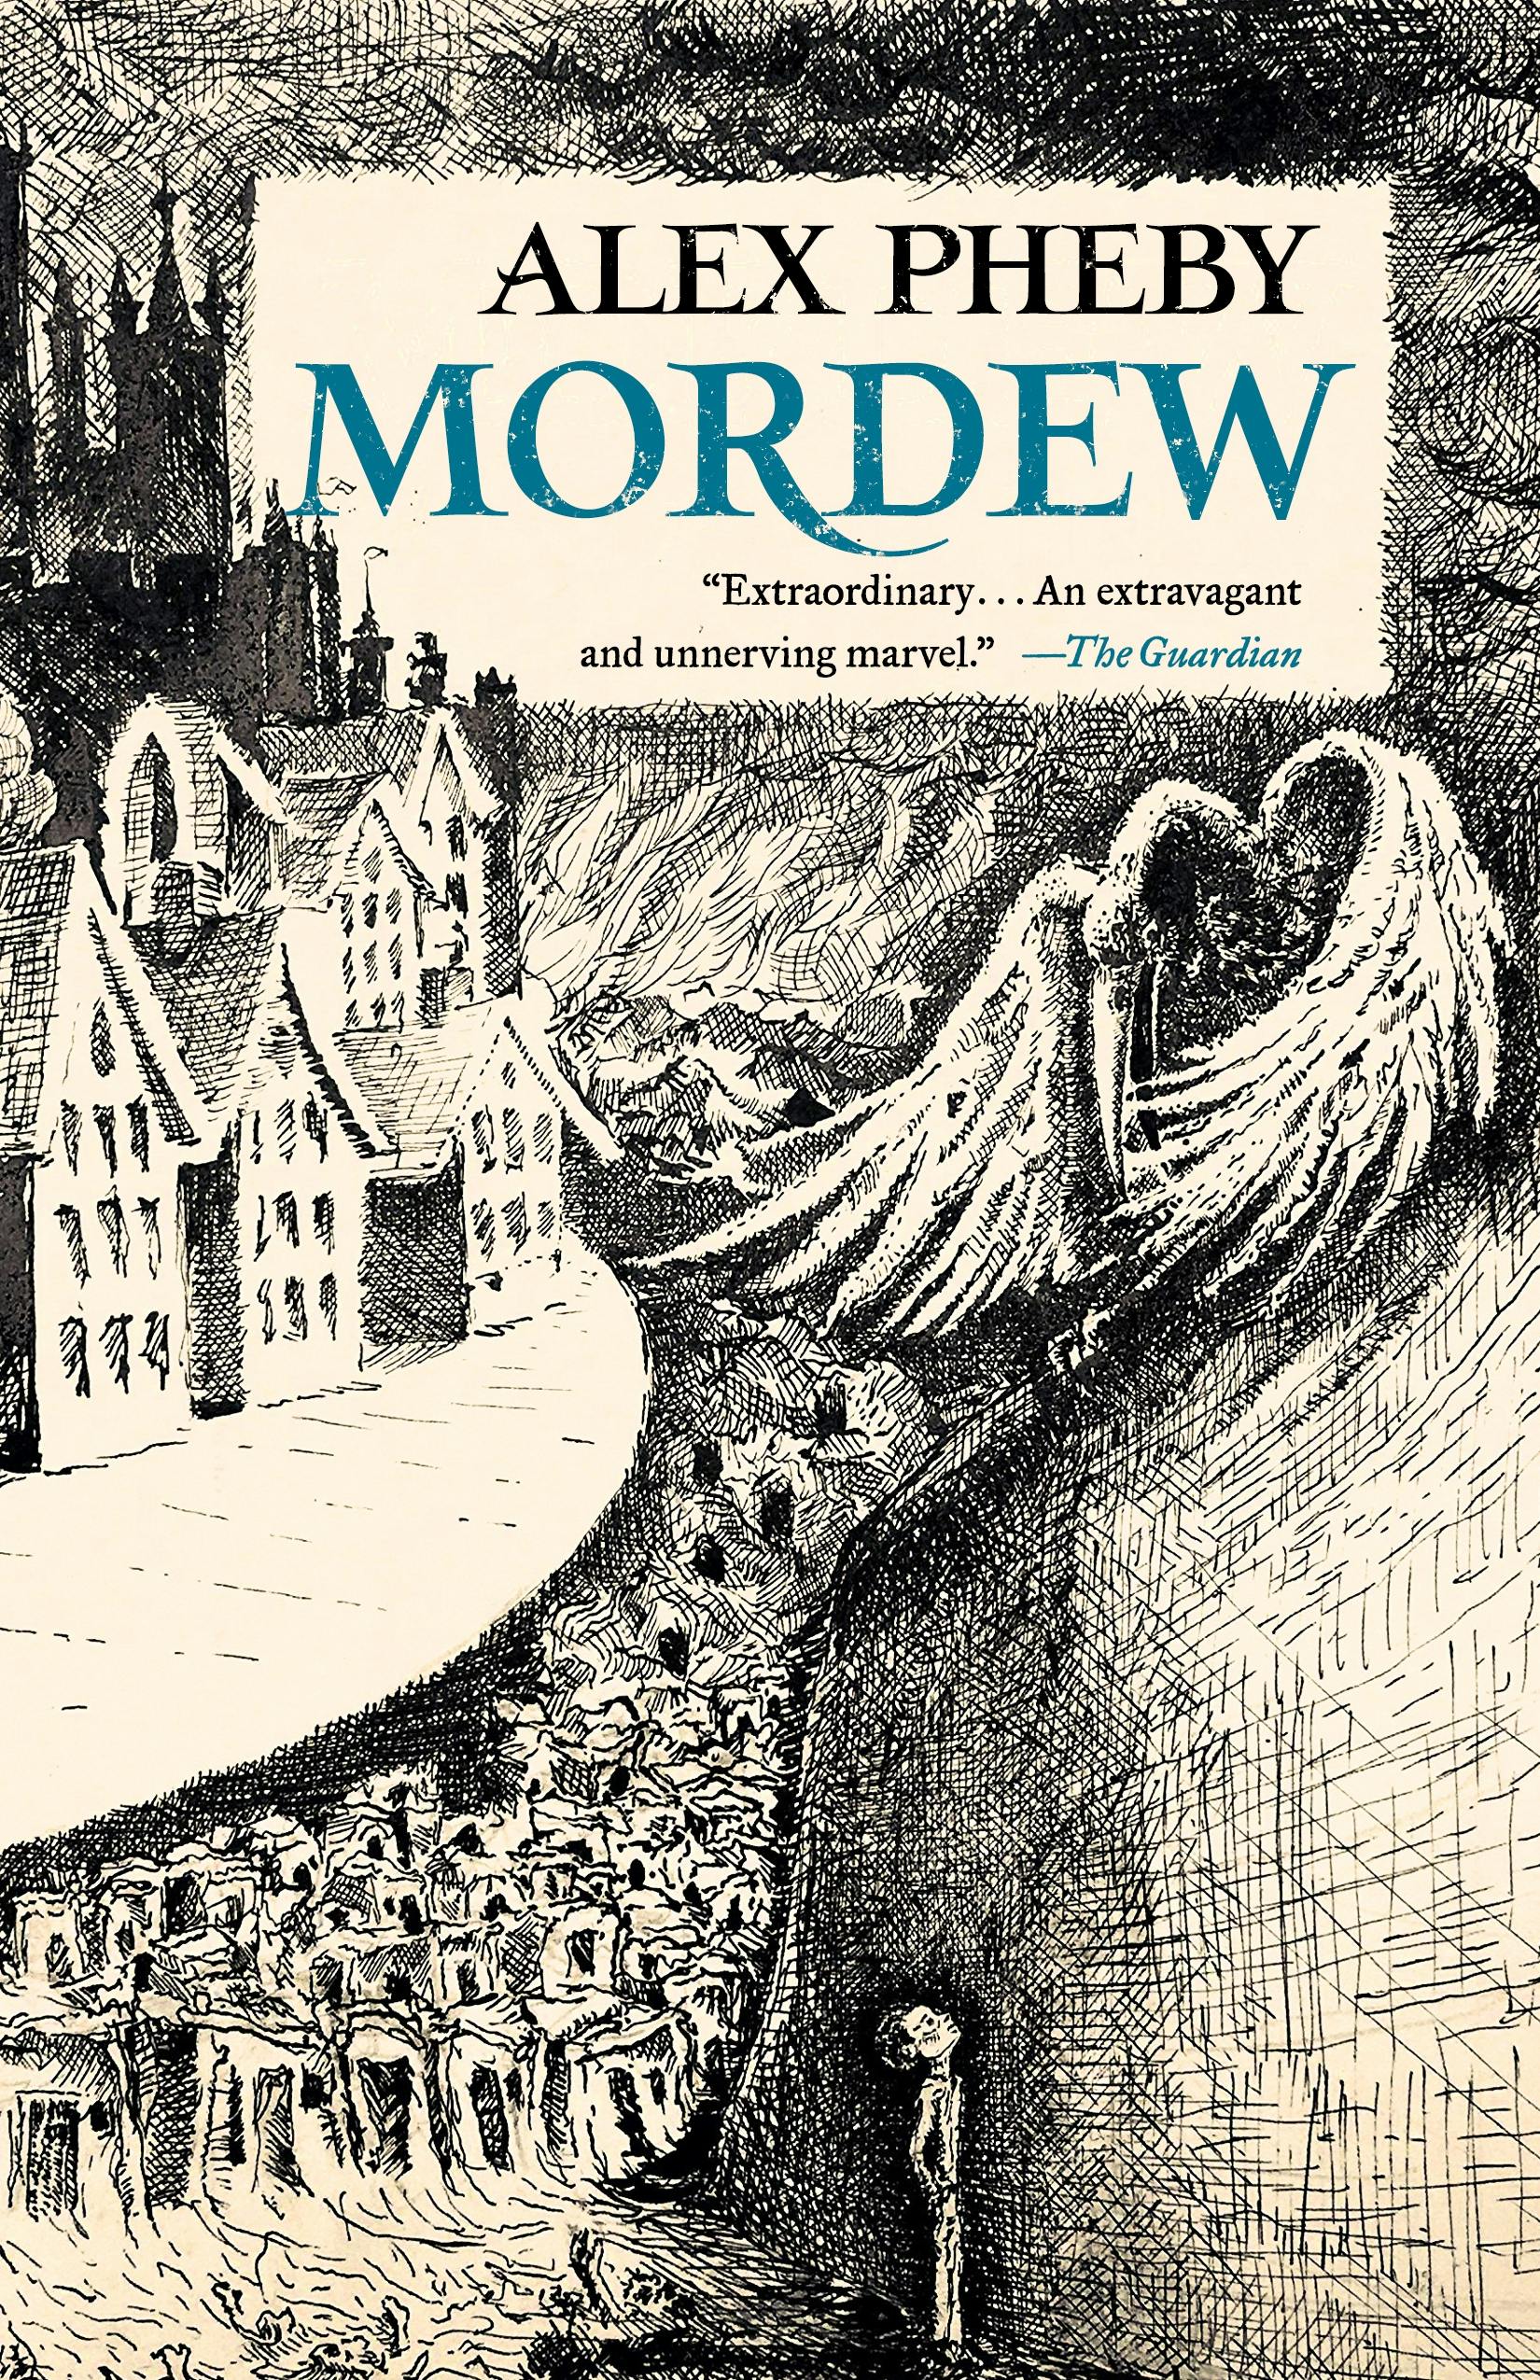 Cover for the book titled as: Mordew